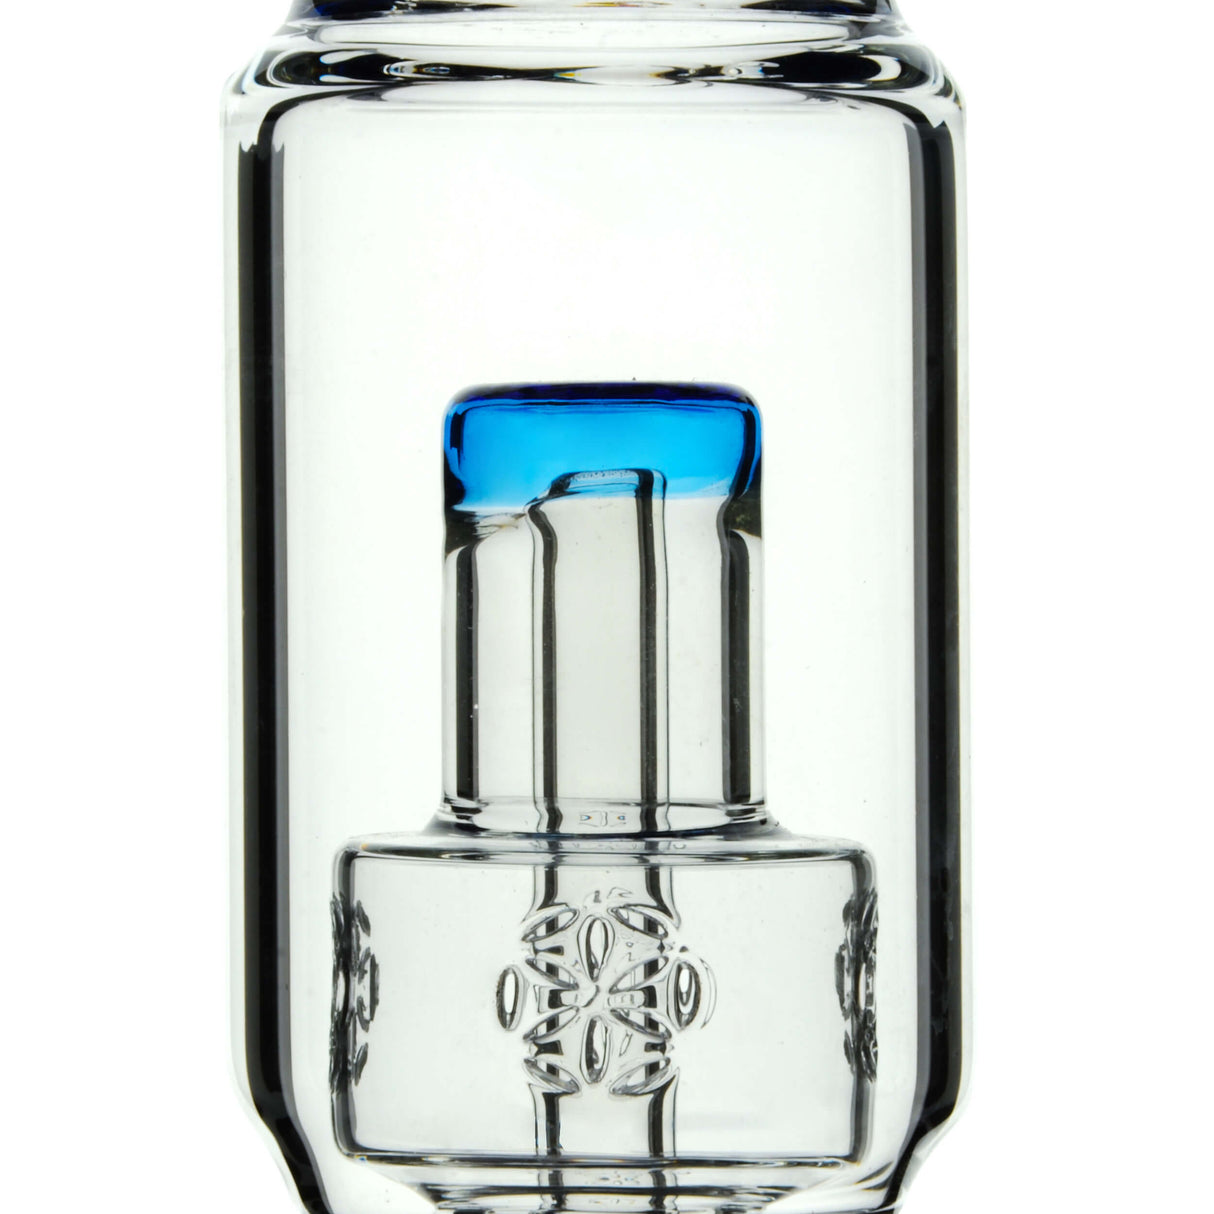 Calibear Sol Straight Tube Bong with Blue Accents - Front View on White Background